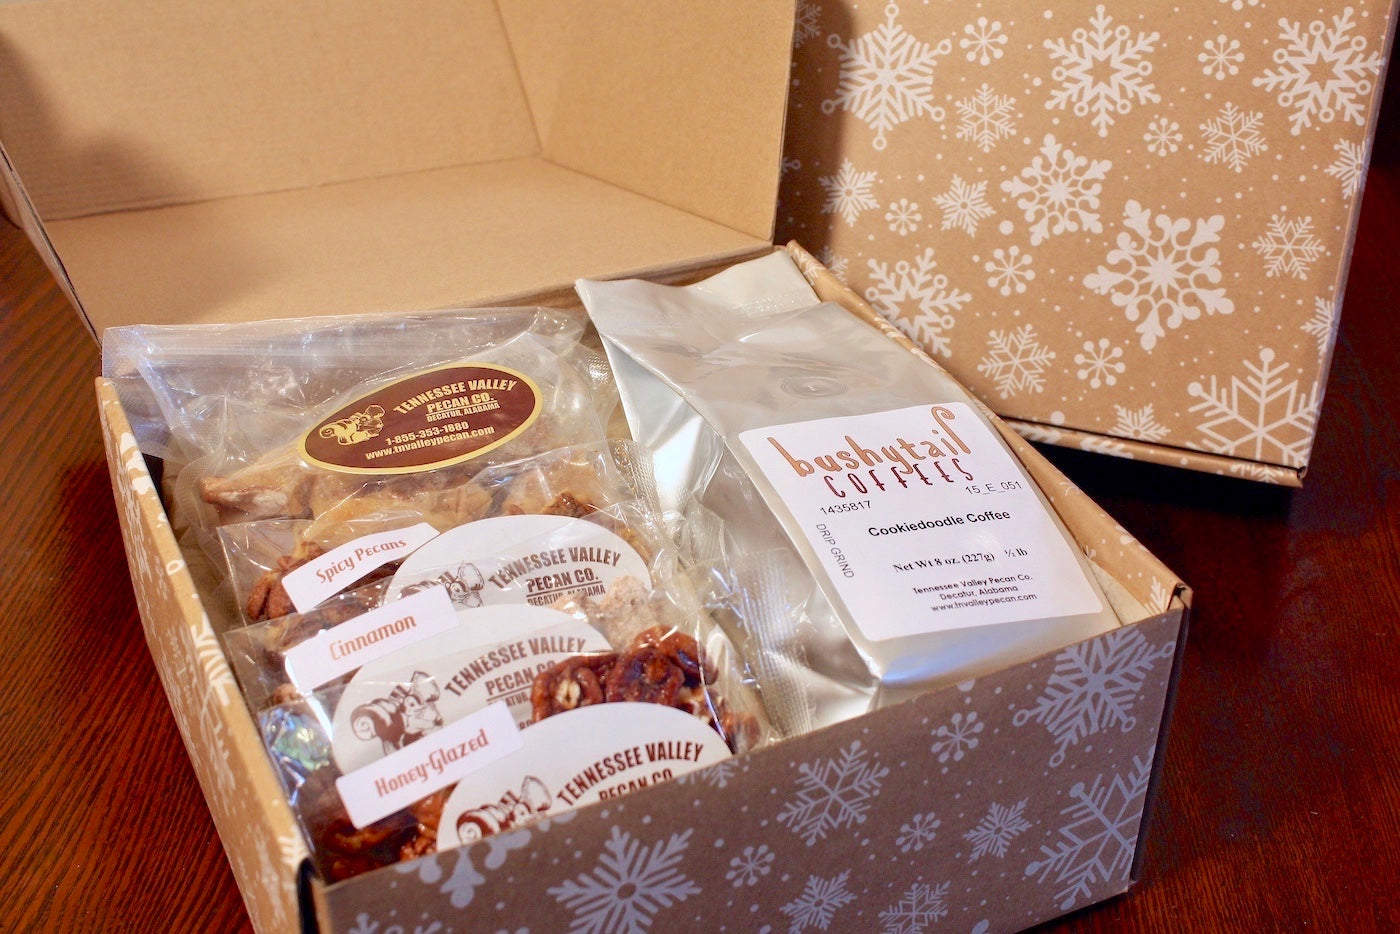 Snowflake Pecan and Bushytail Coffee Gift Box | Tennessee Valley Pecan Company